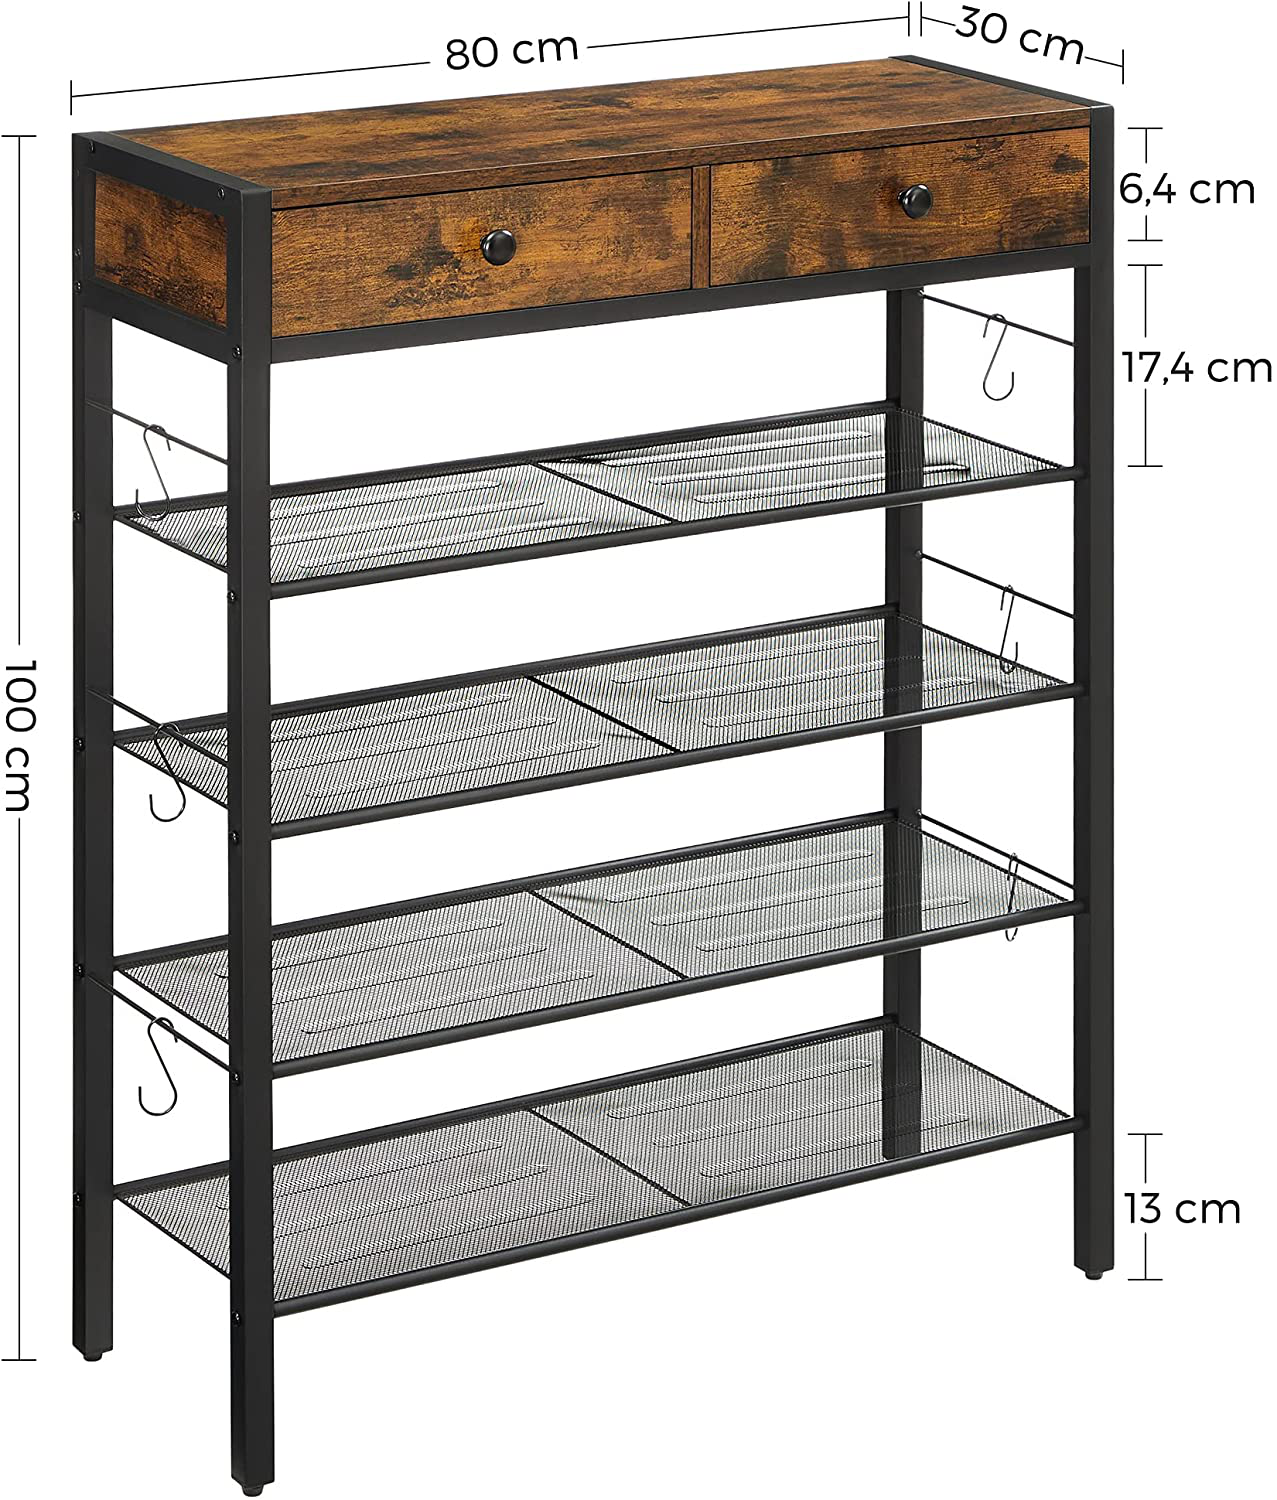 Rena Shoe Rack  Organiser with 2 Drawers and 4 Shelves